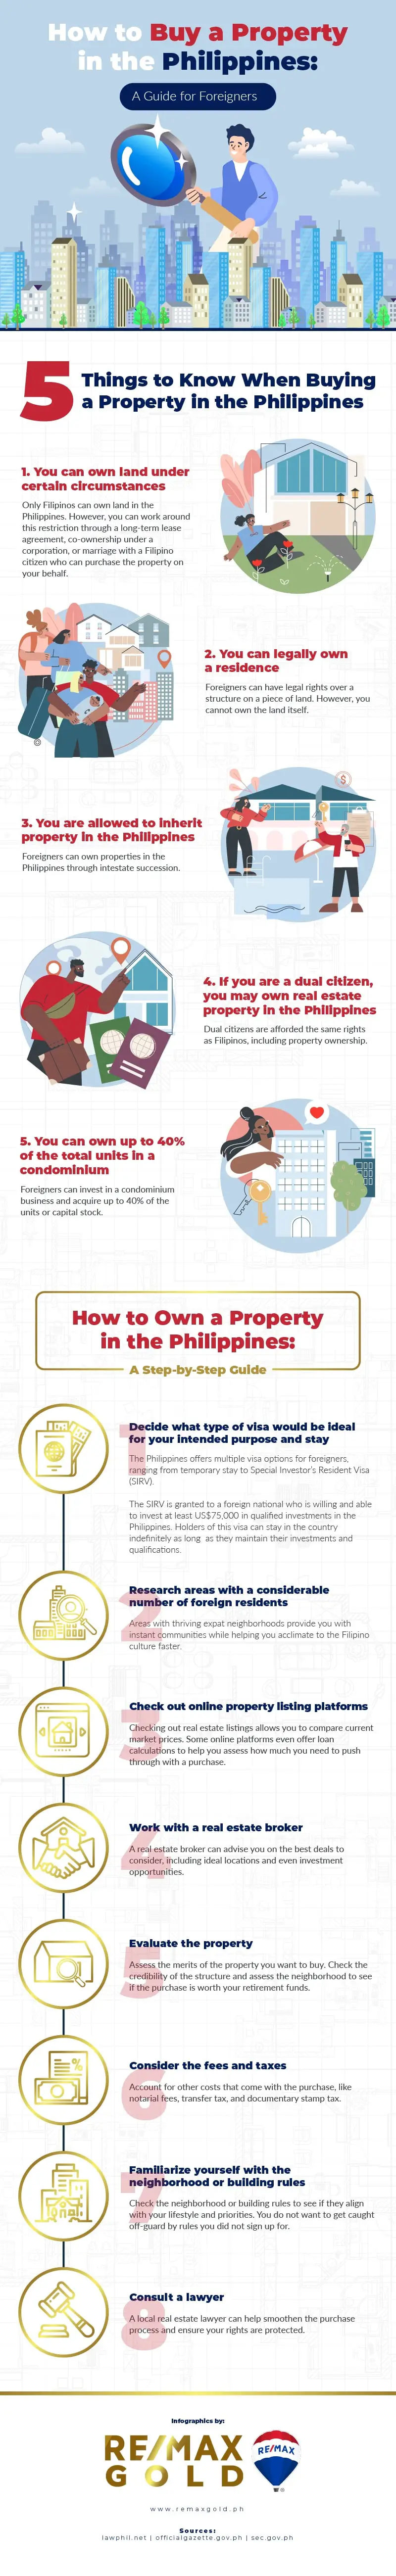 philippine_property_ownership_-_infographic